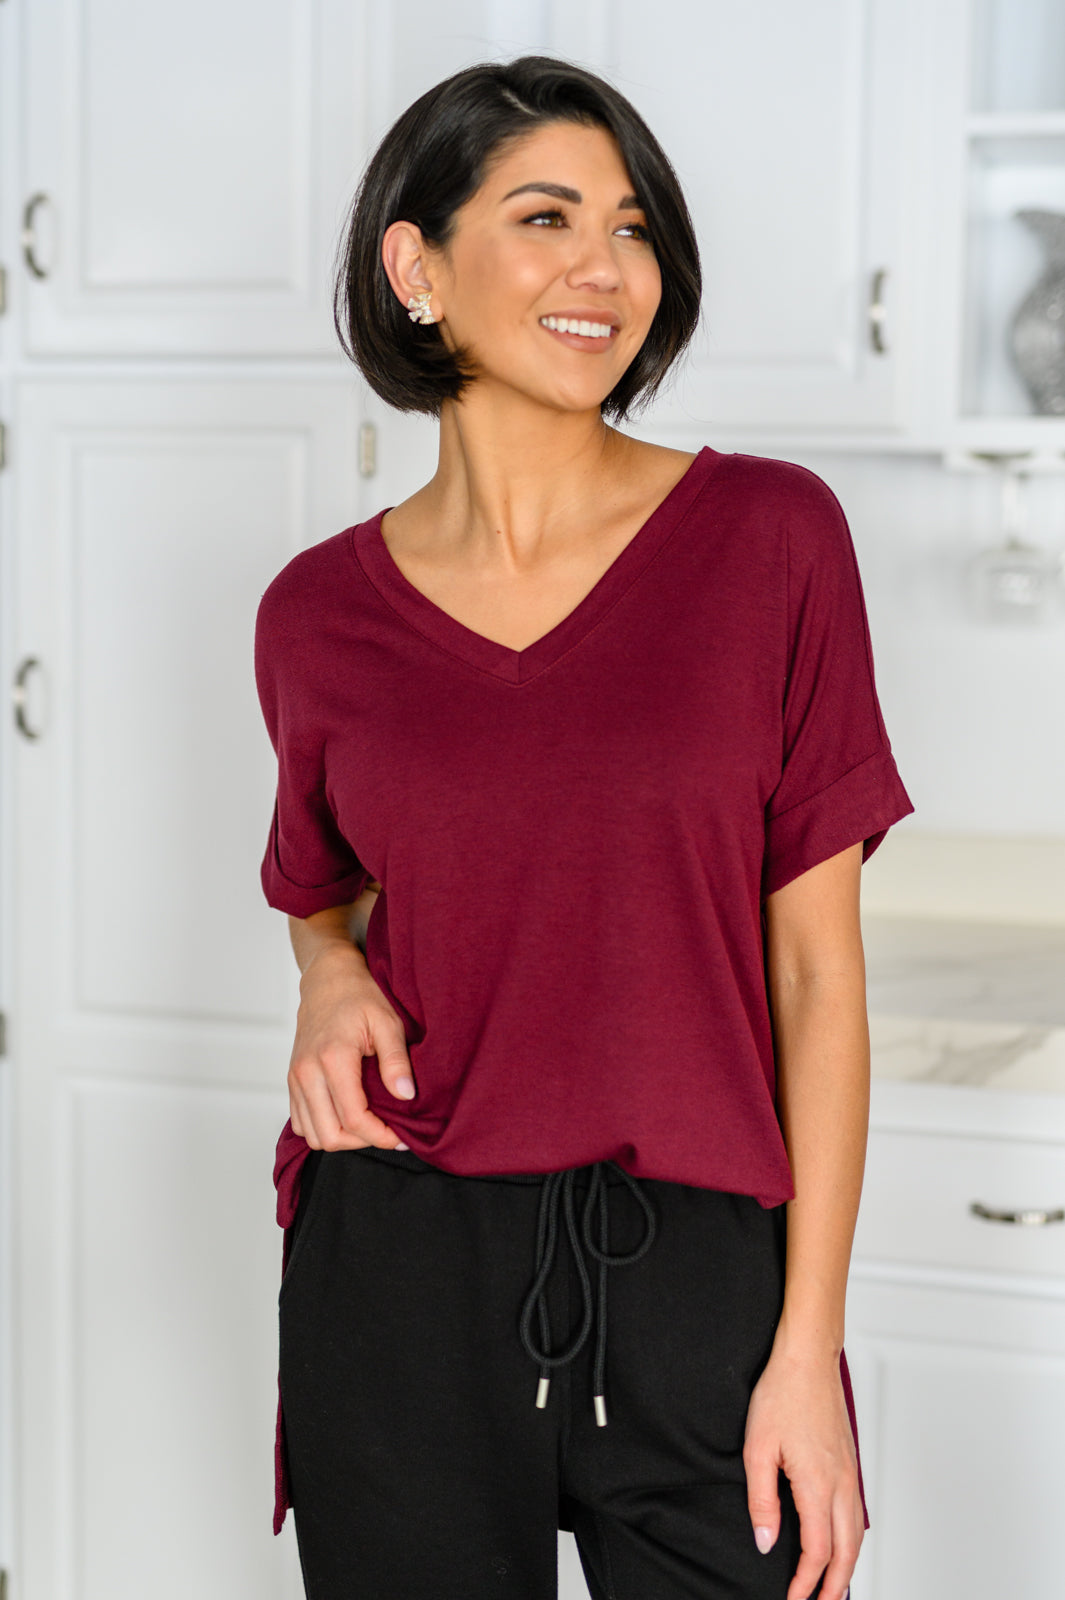 Let The Days Pass By Short Sleeve Top in Burgundy - 12/27/2022